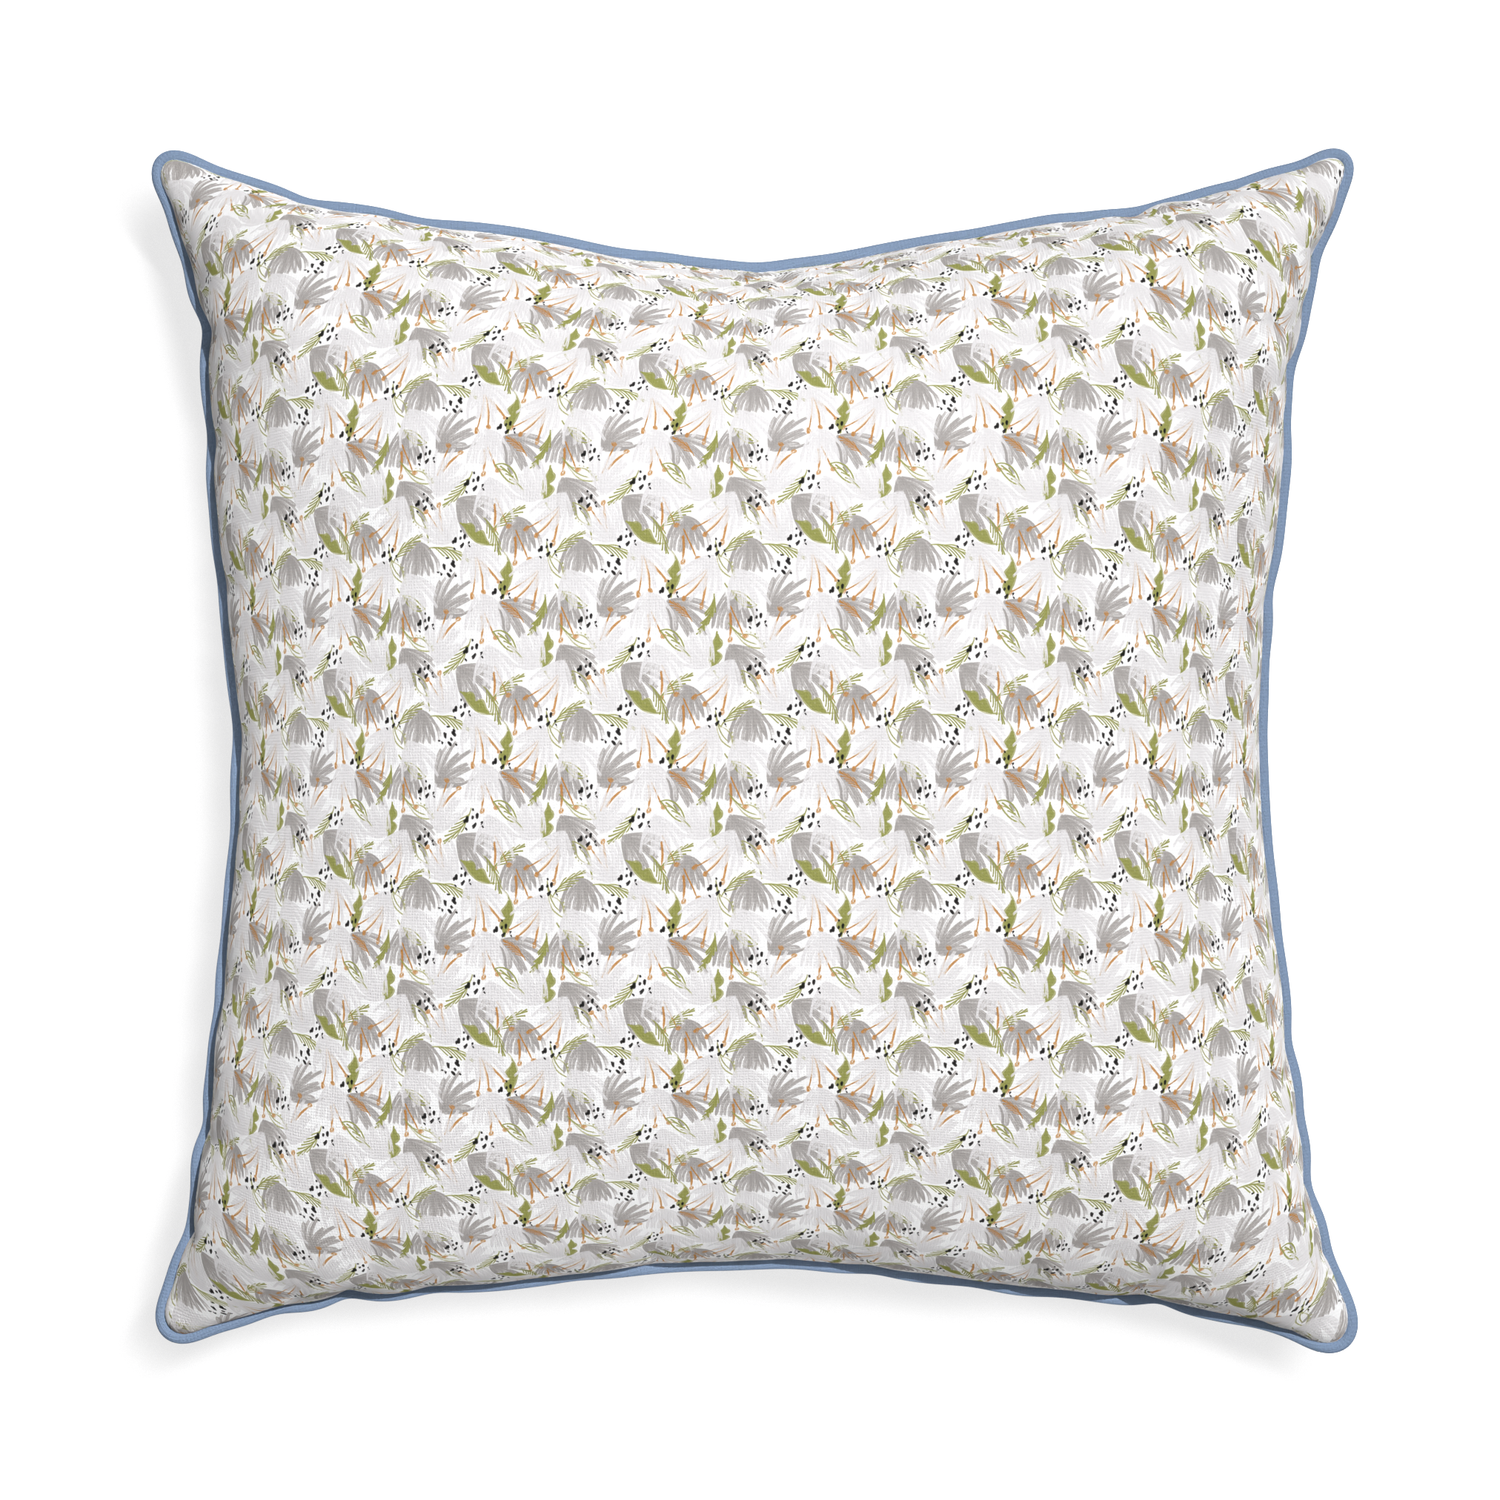 Euro-sham eden grey custom grey floralpillow with sky piping on white background